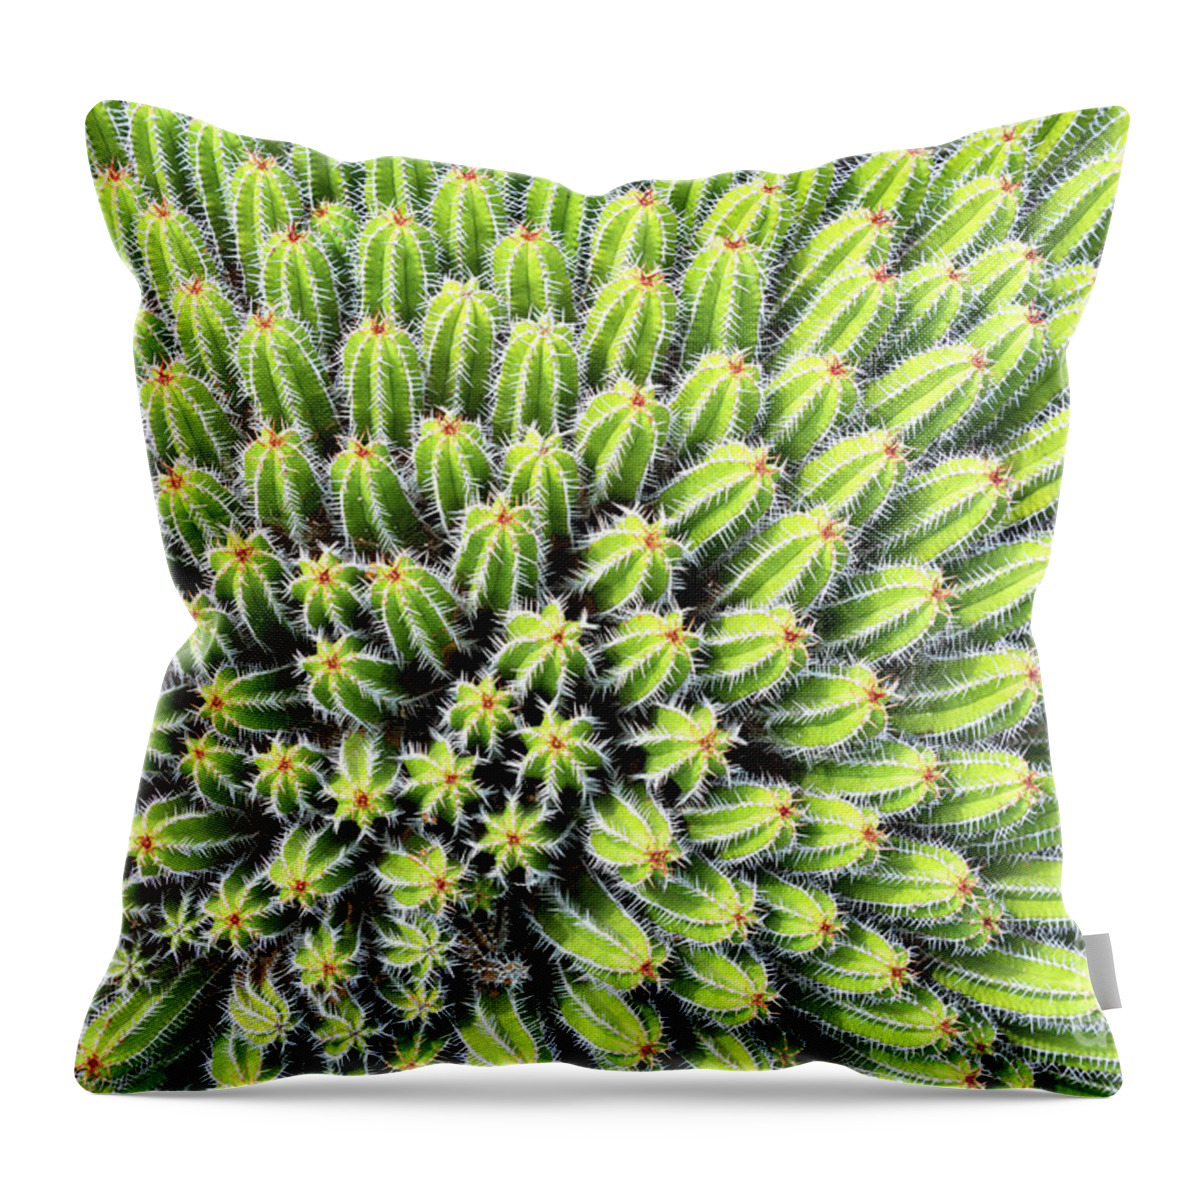 Cactus Throw Pillow featuring the photograph Euphorbia by Delphimages Photo Creations